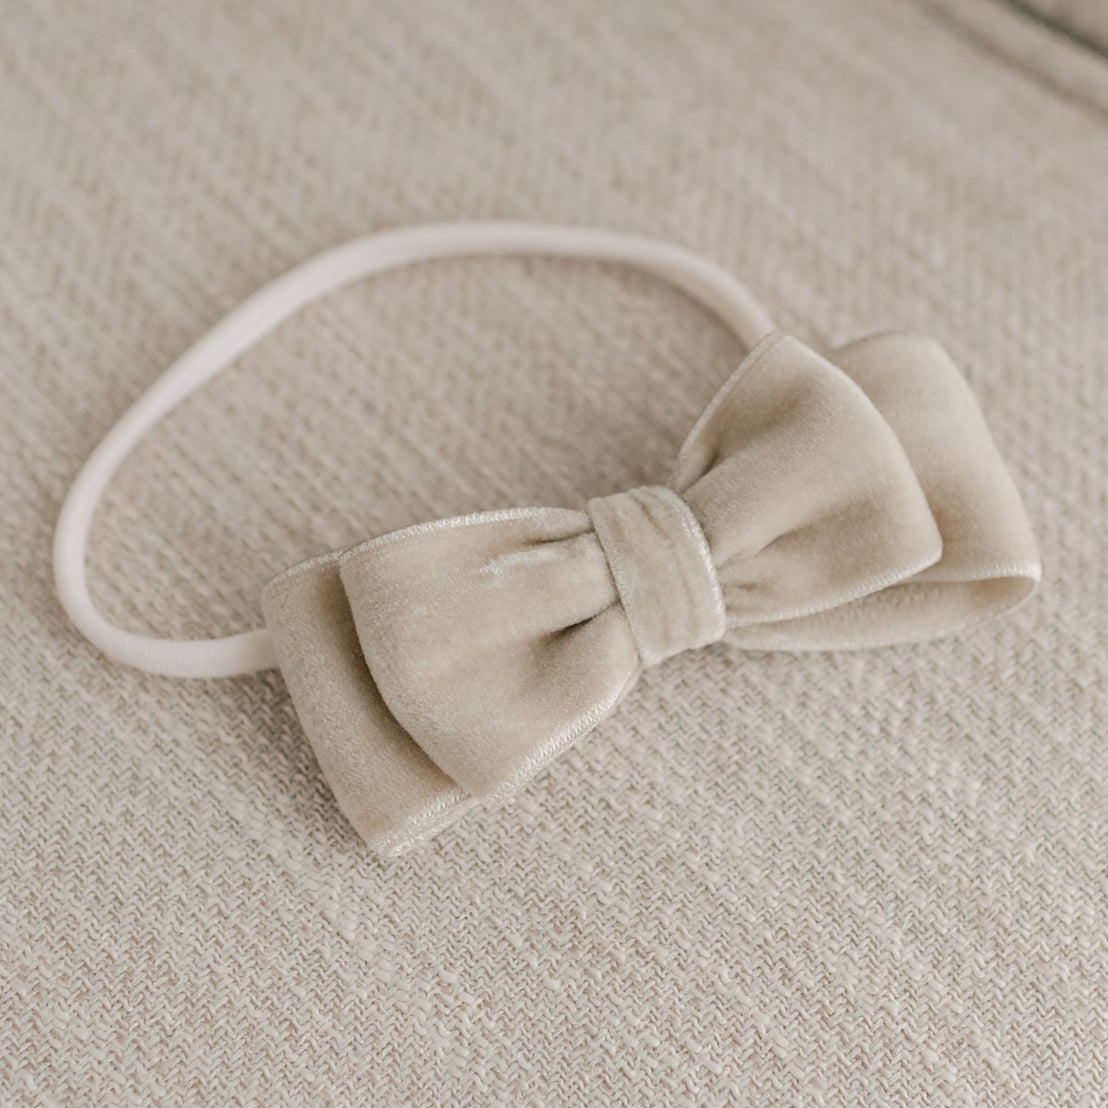 A rose velvet bow headband neatly placed on a textured grey fabric surface. The bow has a soft and luxurious appearance with a simple, elegant design, giving it an upscale, vintage look.